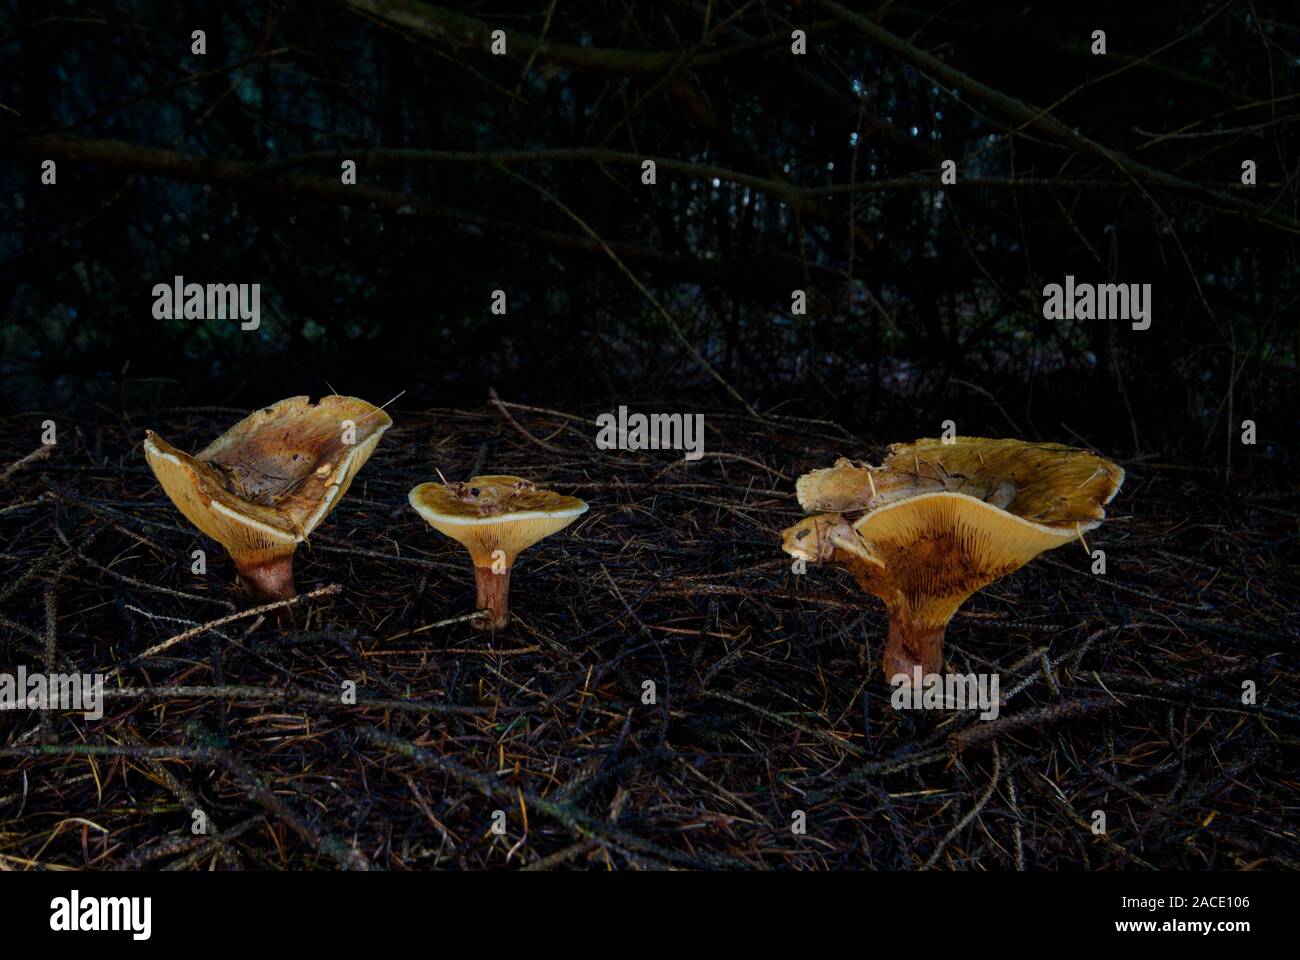 Three False  chanterelles in a mysterious dark forest, growing in a thick layer of pine needle litter Stock Photo